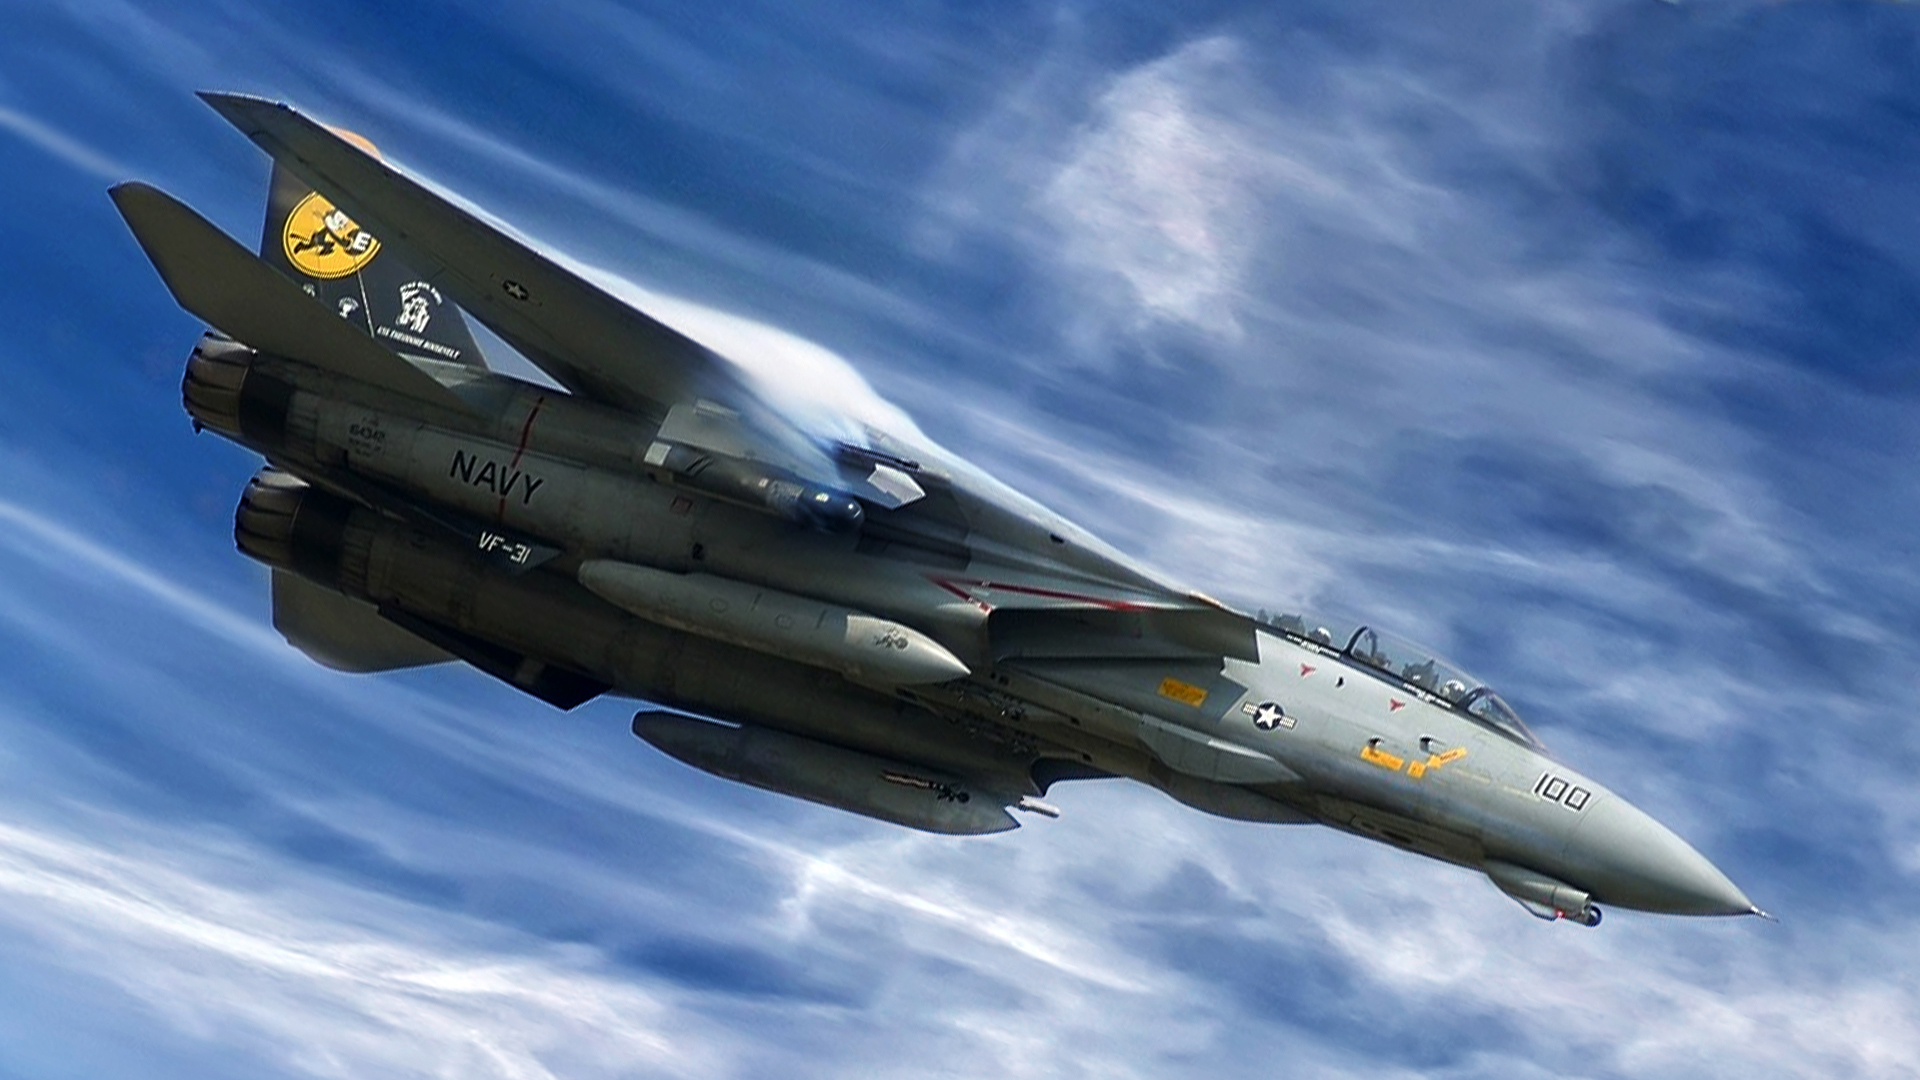 Military Jet Fighter Wallpaper 1920x1080 Military Jet Fighter 1920x1080